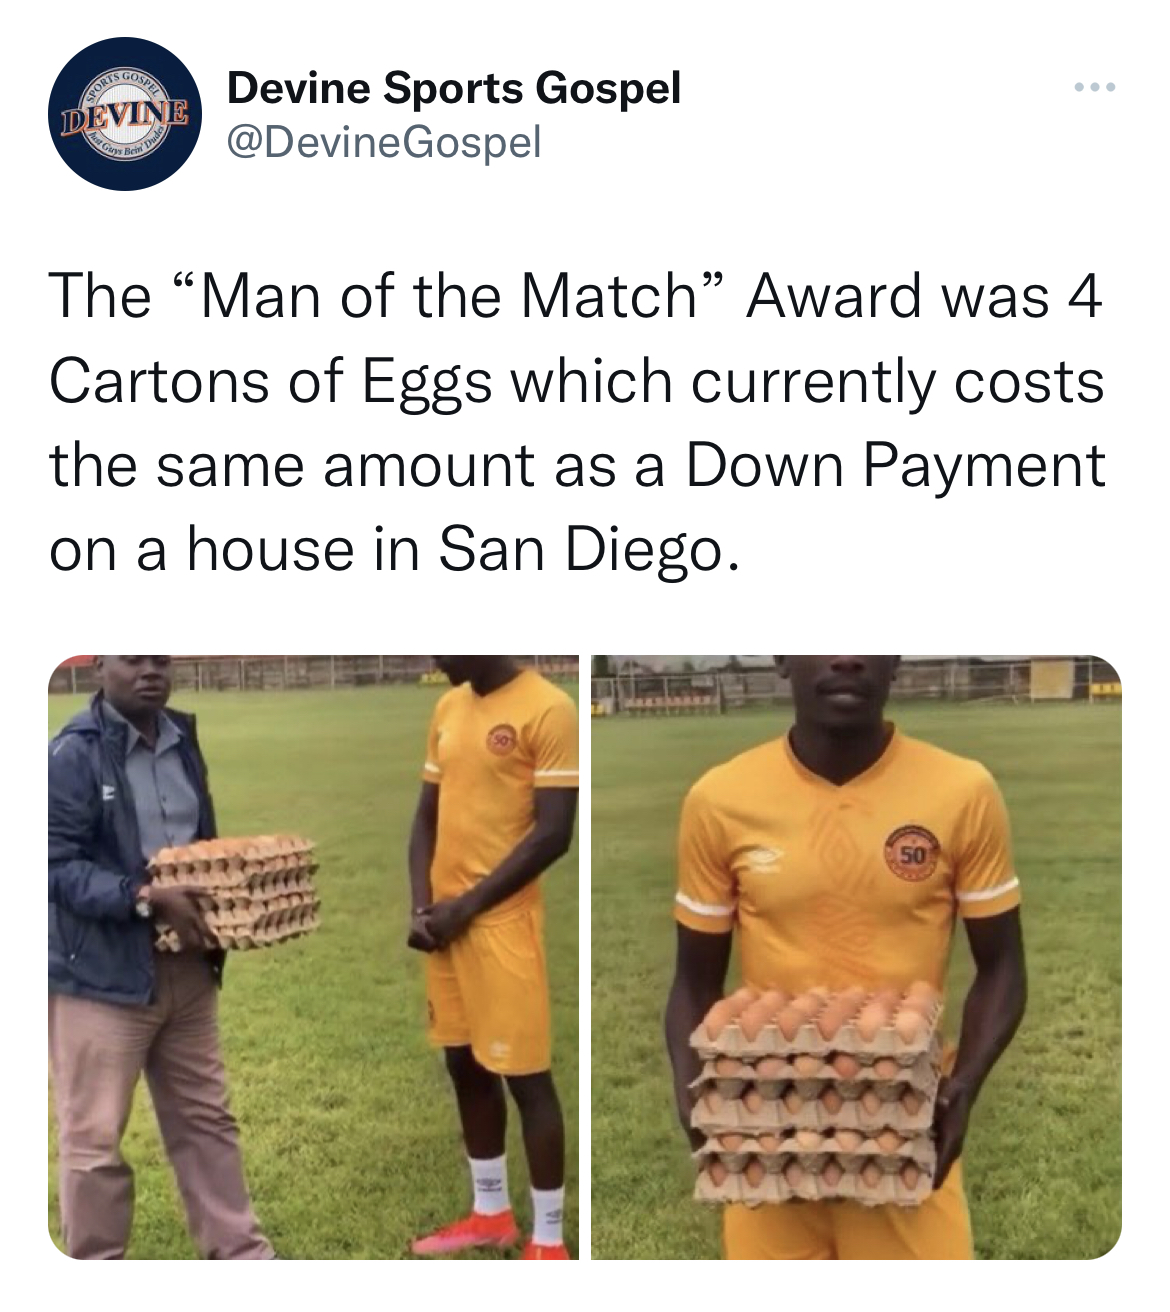 Egg Shortage 2023 memes - t shirt - Devine Devine Sports Gospel The "Man of the Match" Award was 4 Cartons of Eggs which currently costs the same amount as a Down Payment on a house in San Diego.